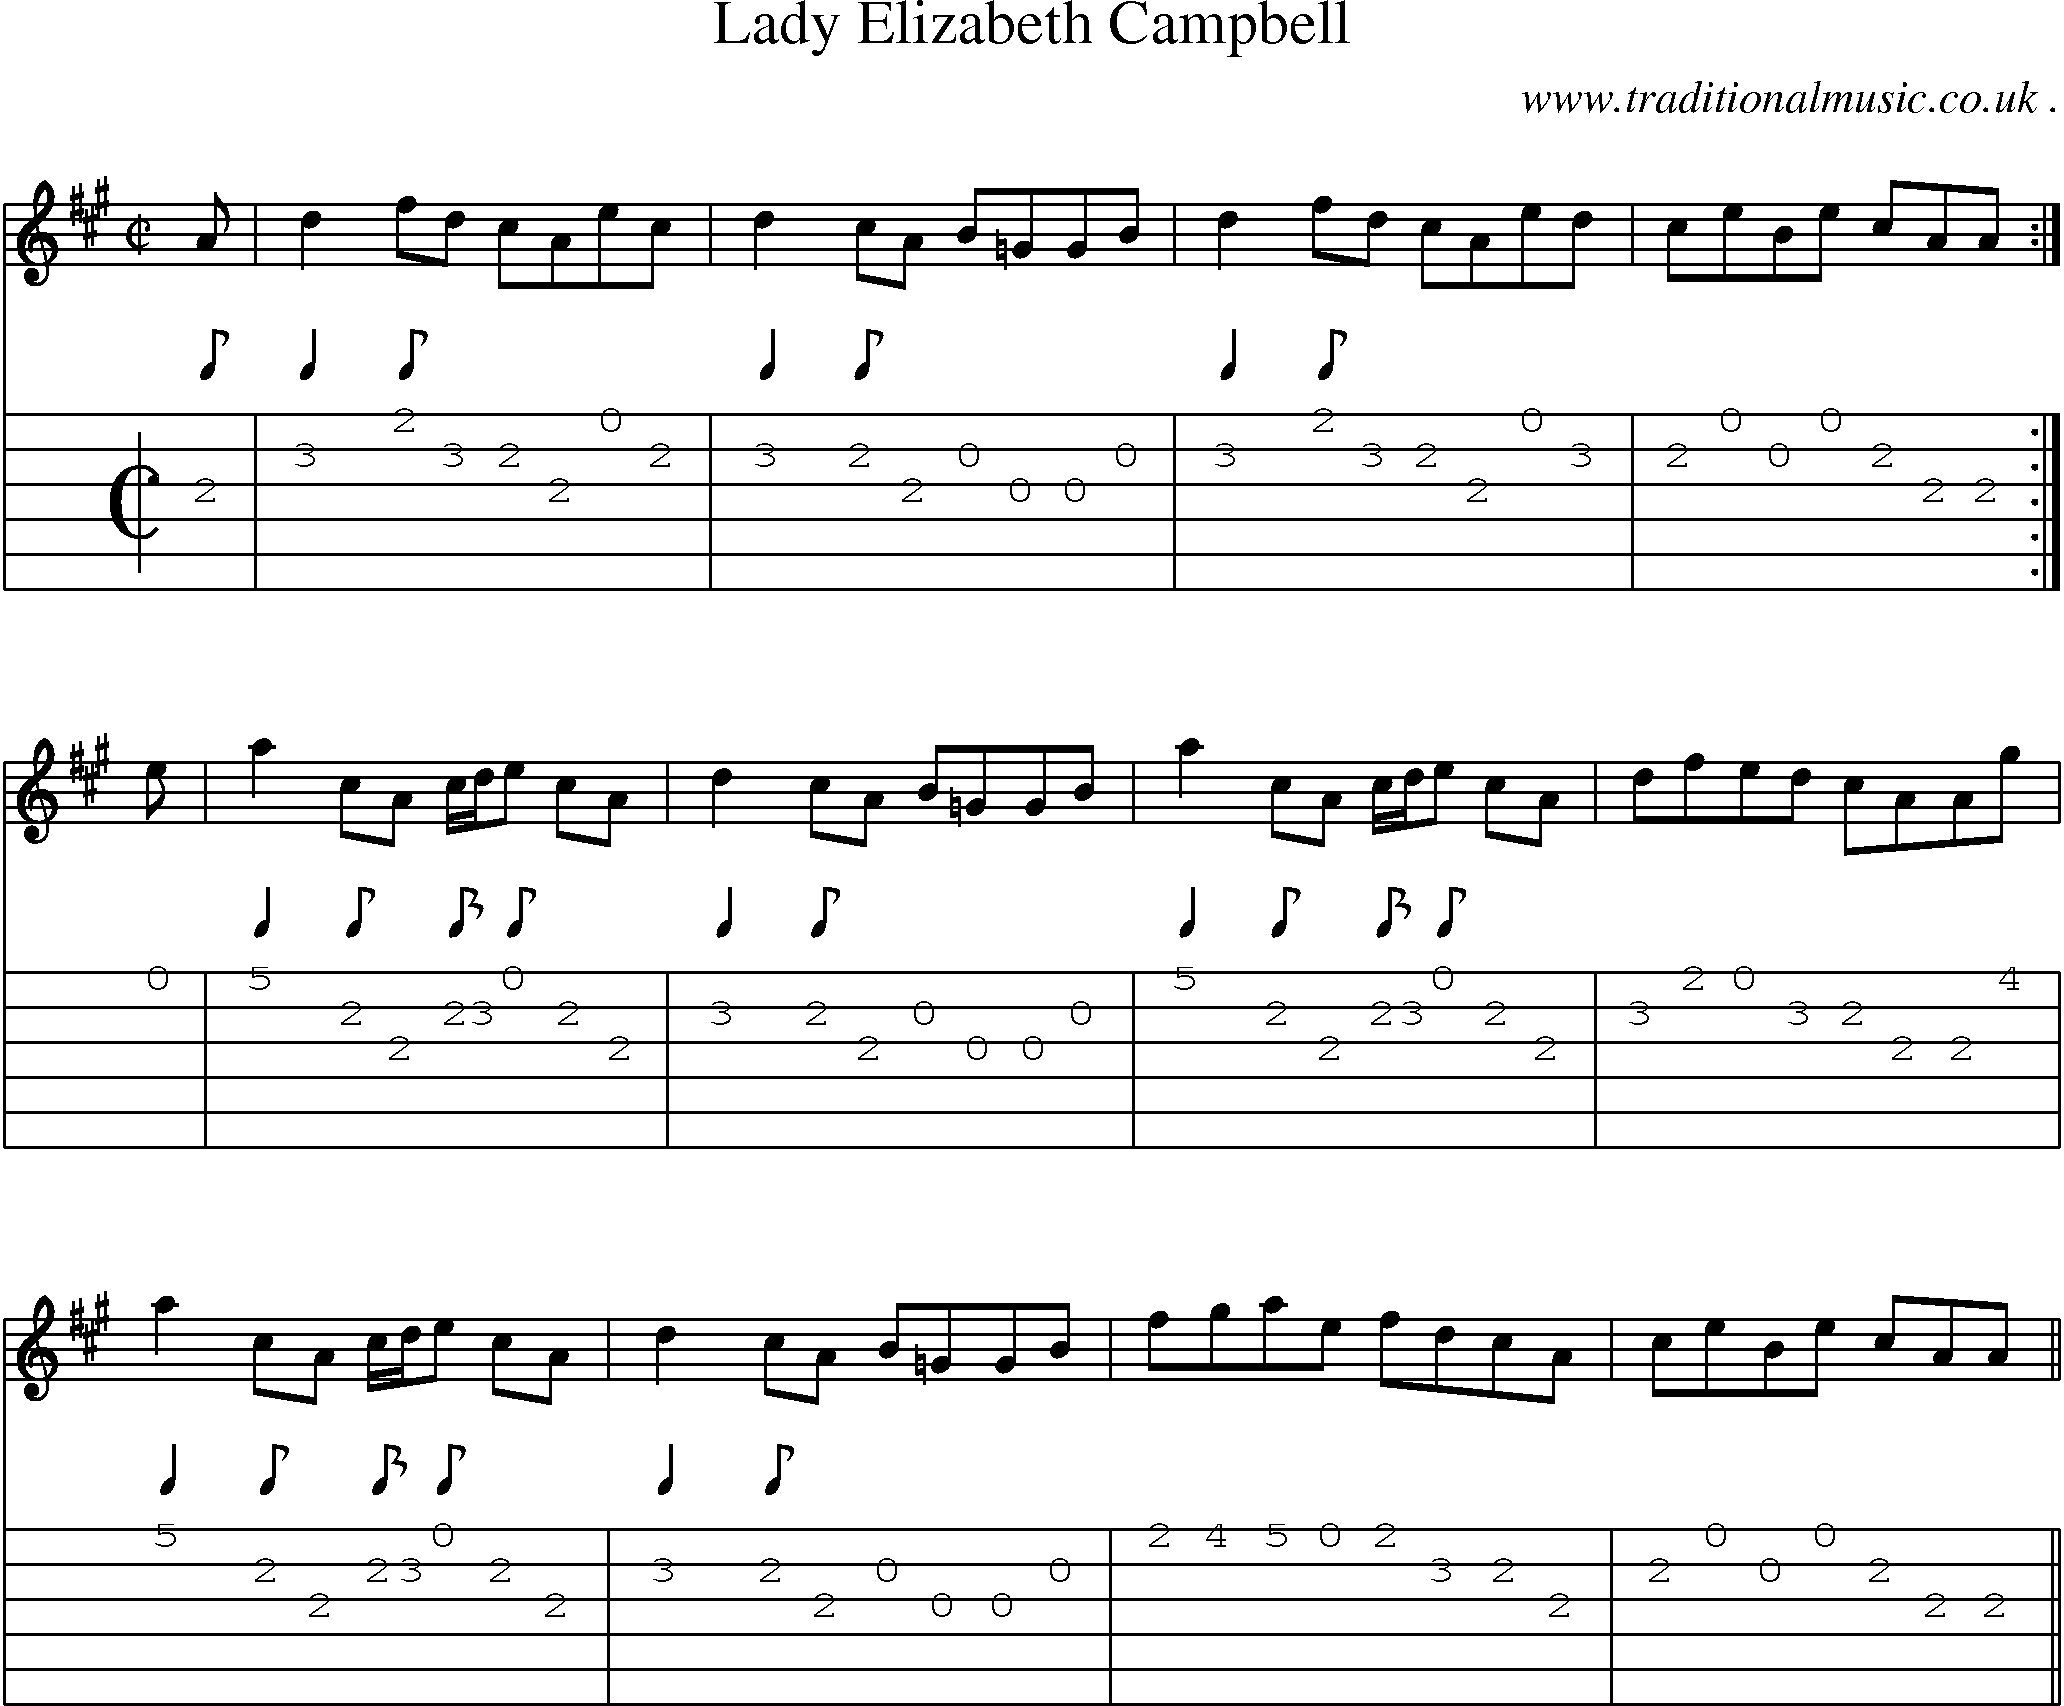 Sheet-music  score, Chords and Guitar Tabs for Lady Elizabeth Campbell